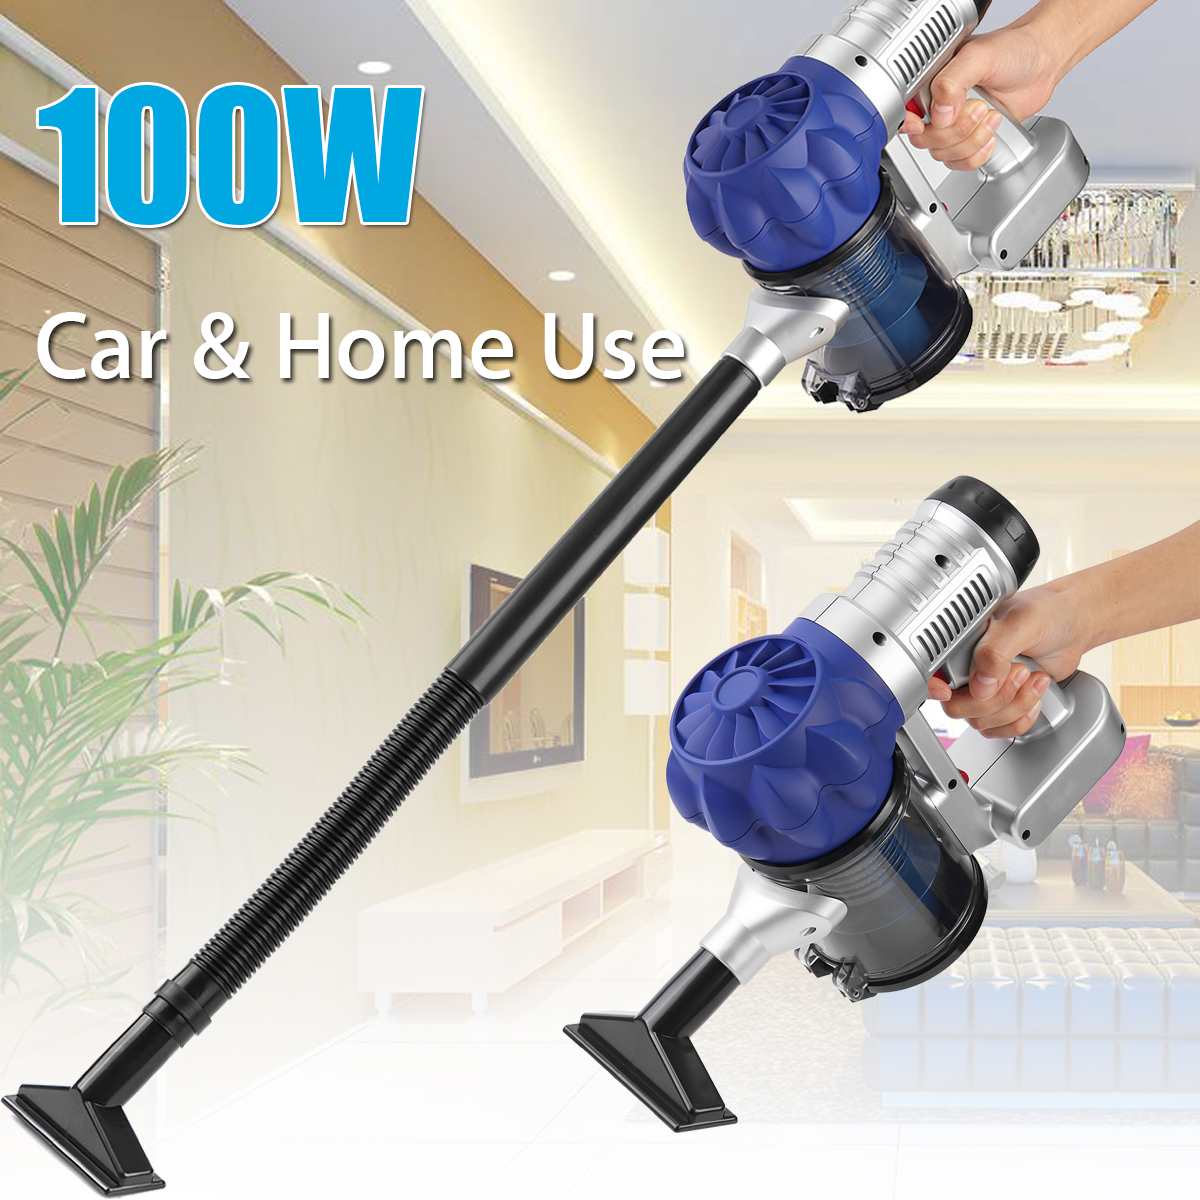 2-In-1-Cordless-Stick-Vacuum-Cleaner-Bagless-For-Car-Home-Use-3500Pa-Dry-Wet-Use-1383481